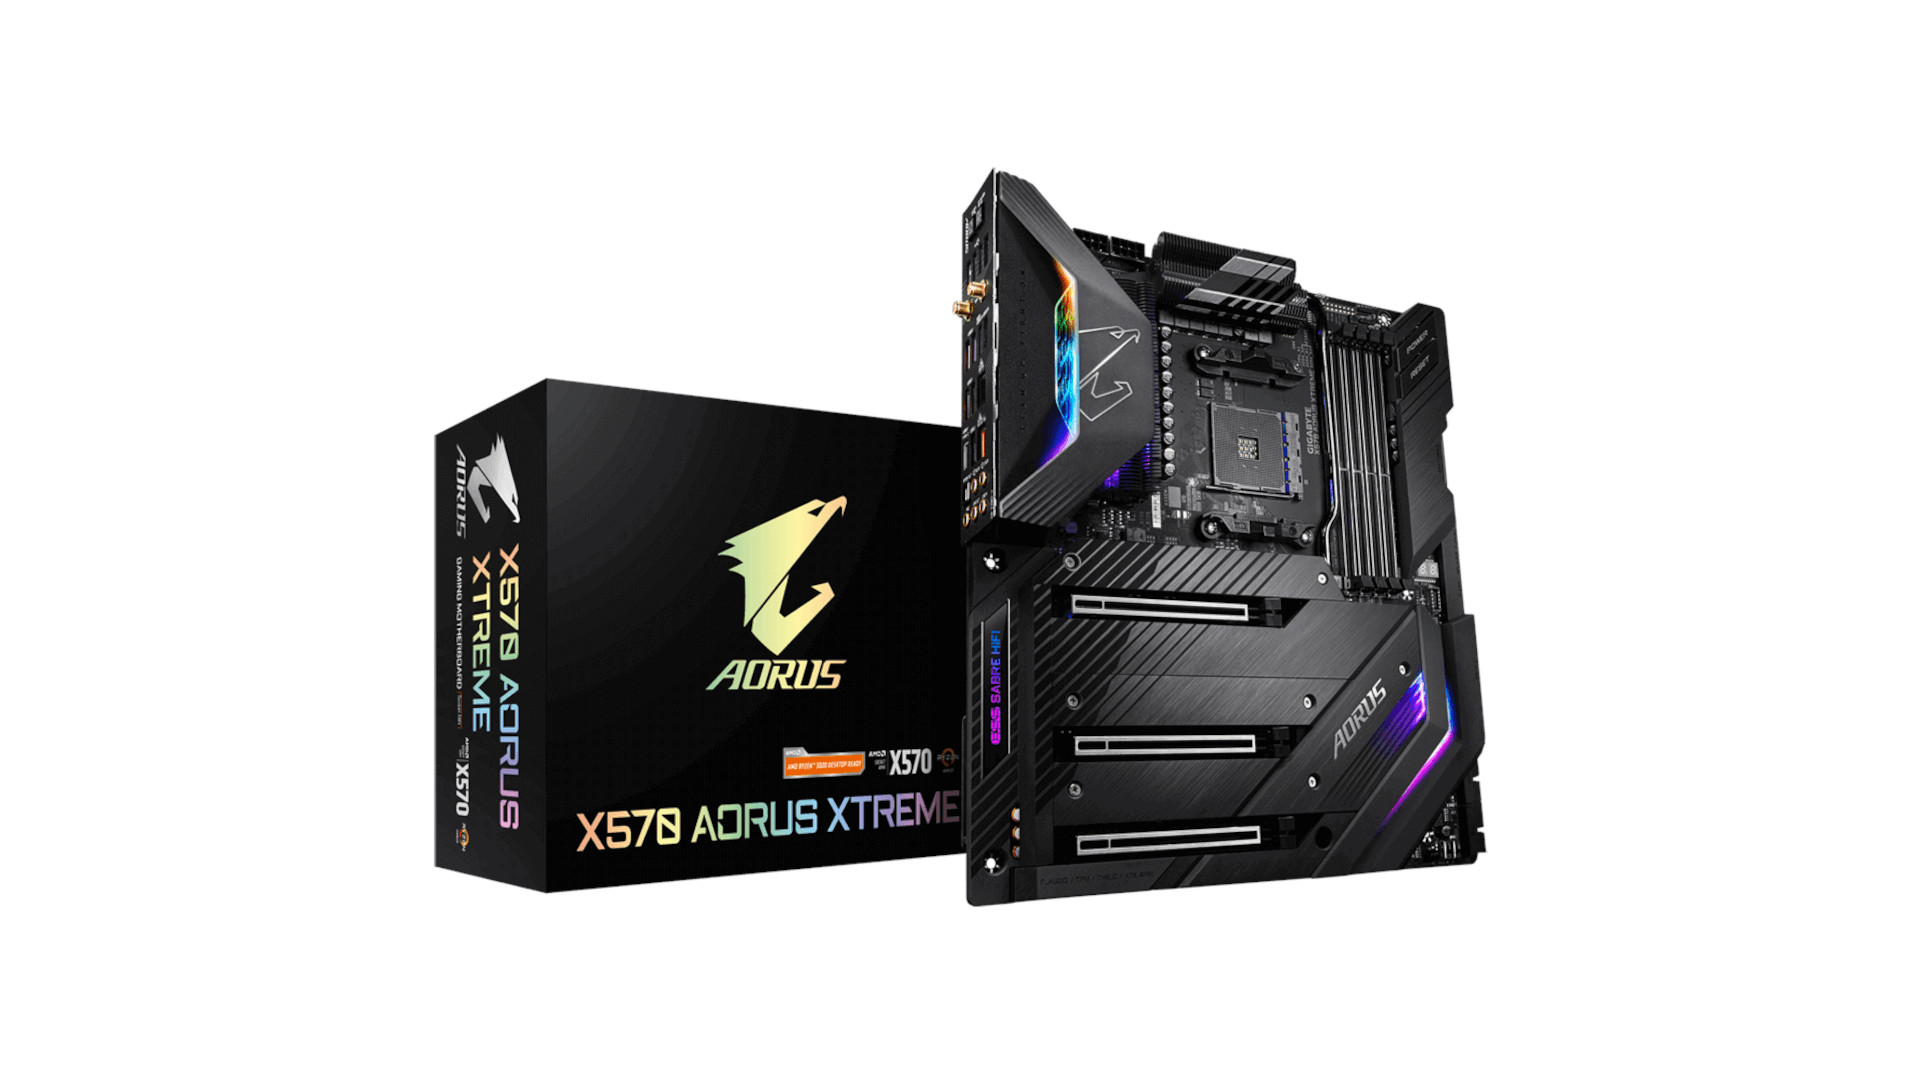 The best AMD motherboard is the Gigabyte Aorus X570 Xtreme